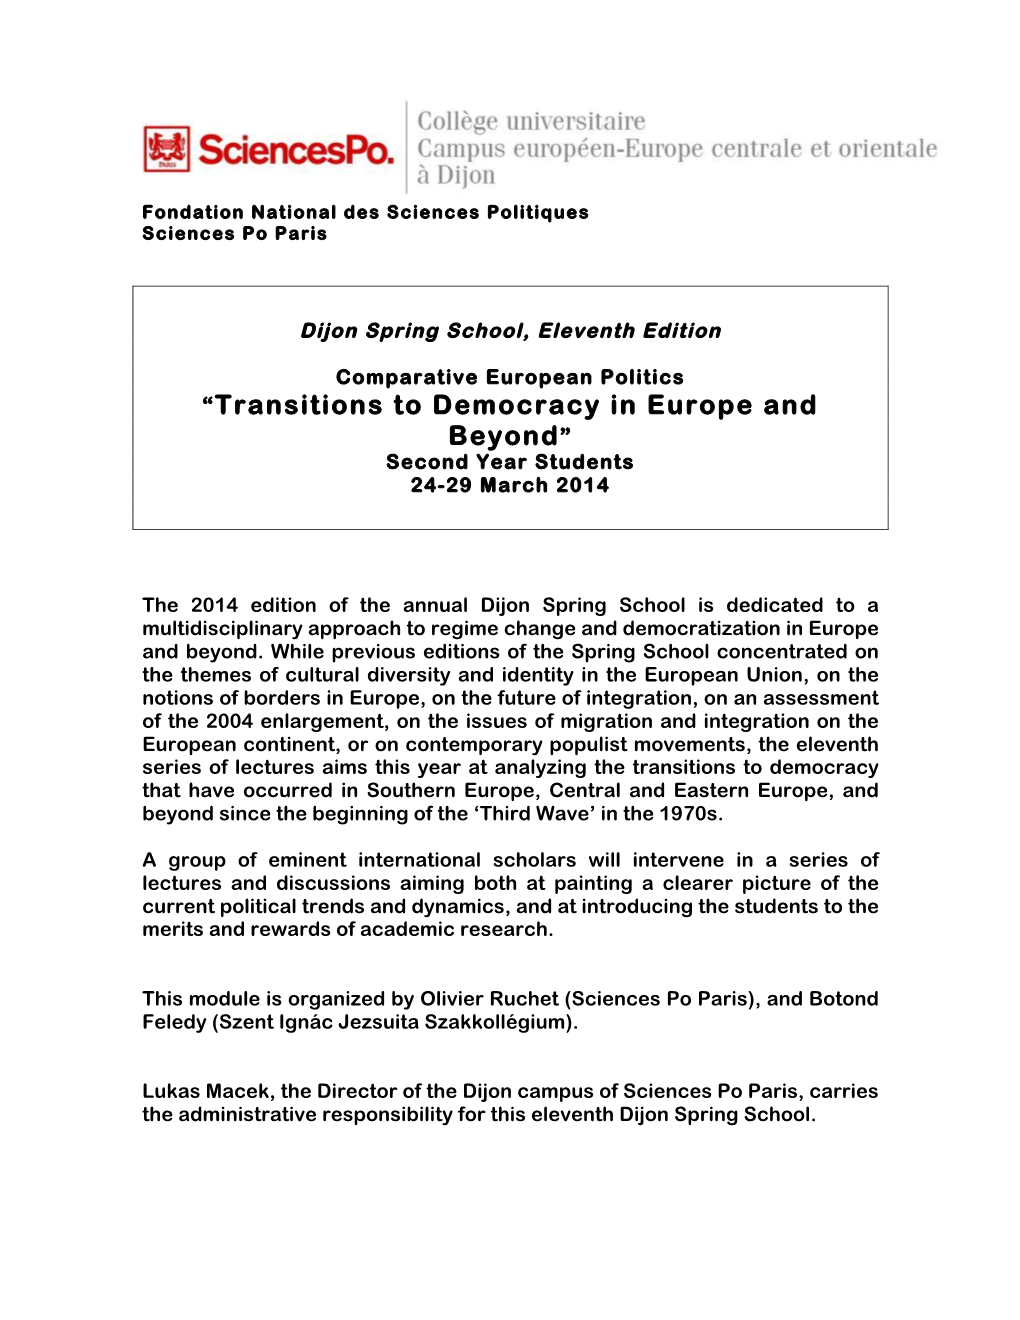 “Transitions to Democracy in Europe and Beyond” Second Year Students 24-29 March 2014